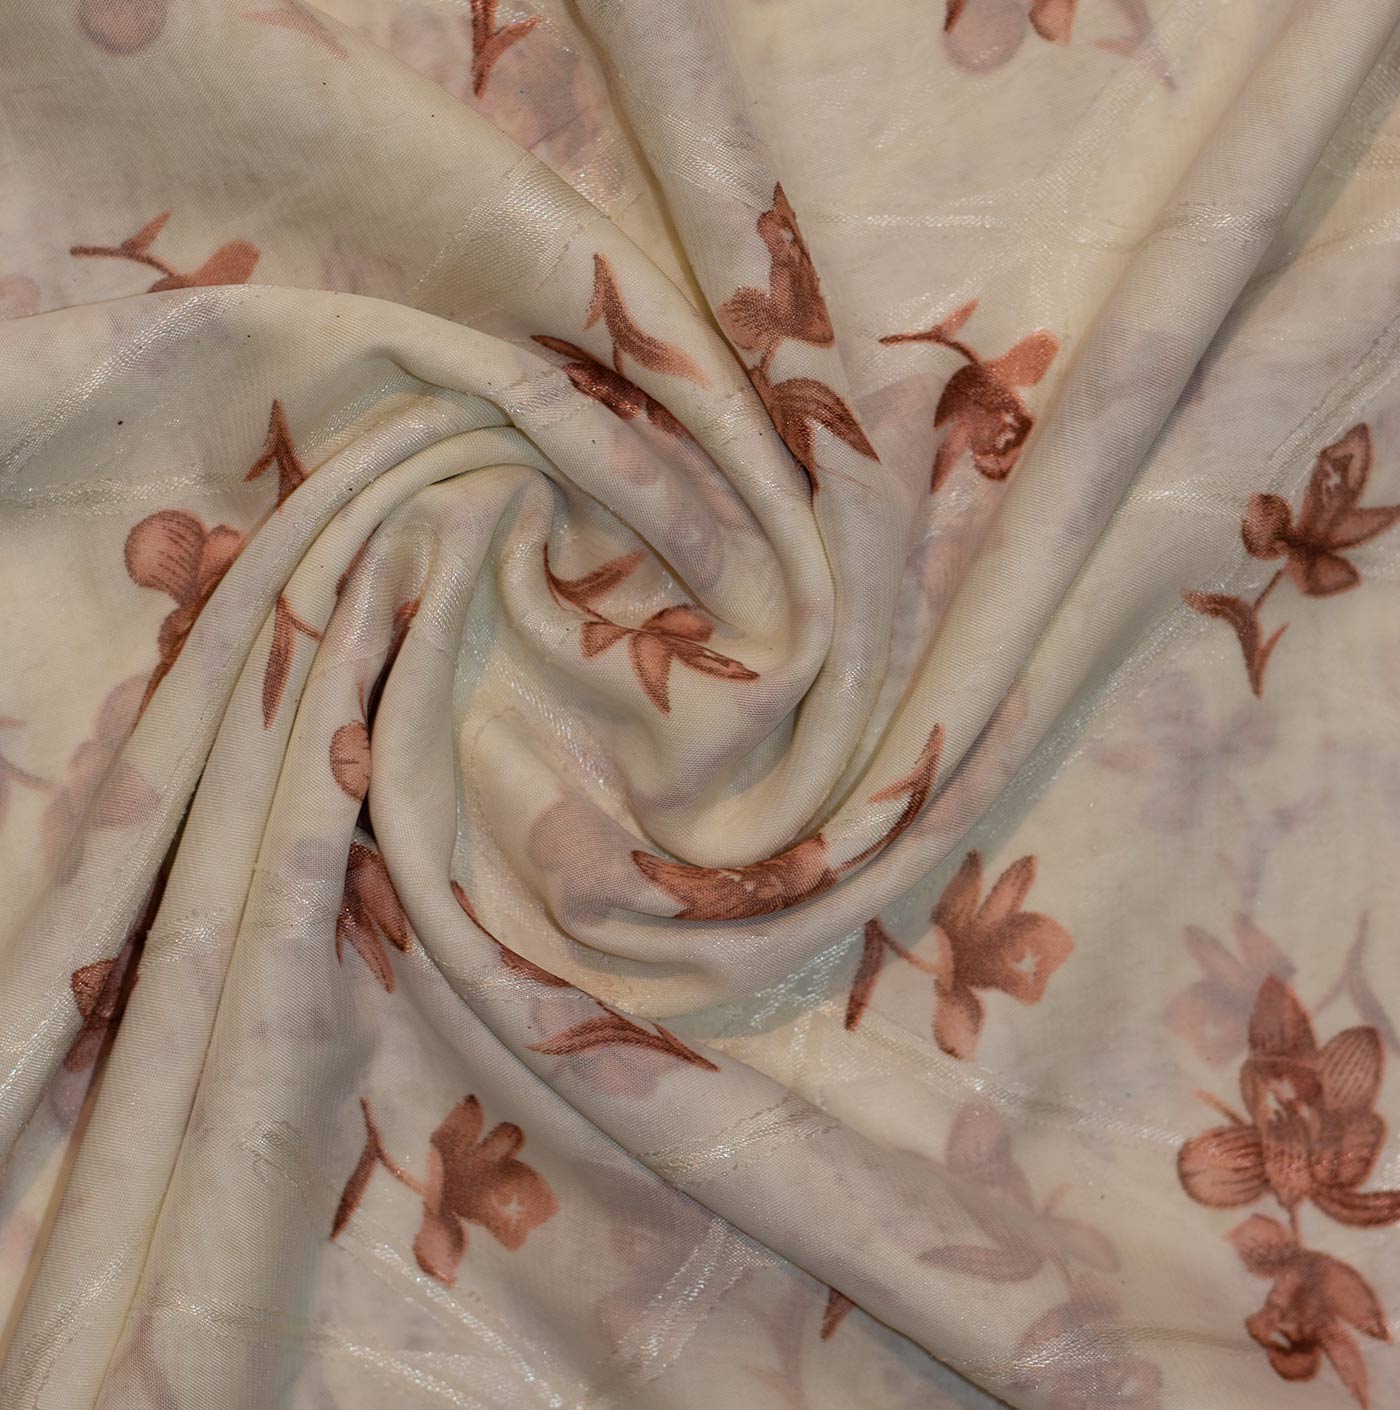 Brown and Cream Floral Printed Chiffon Fabric